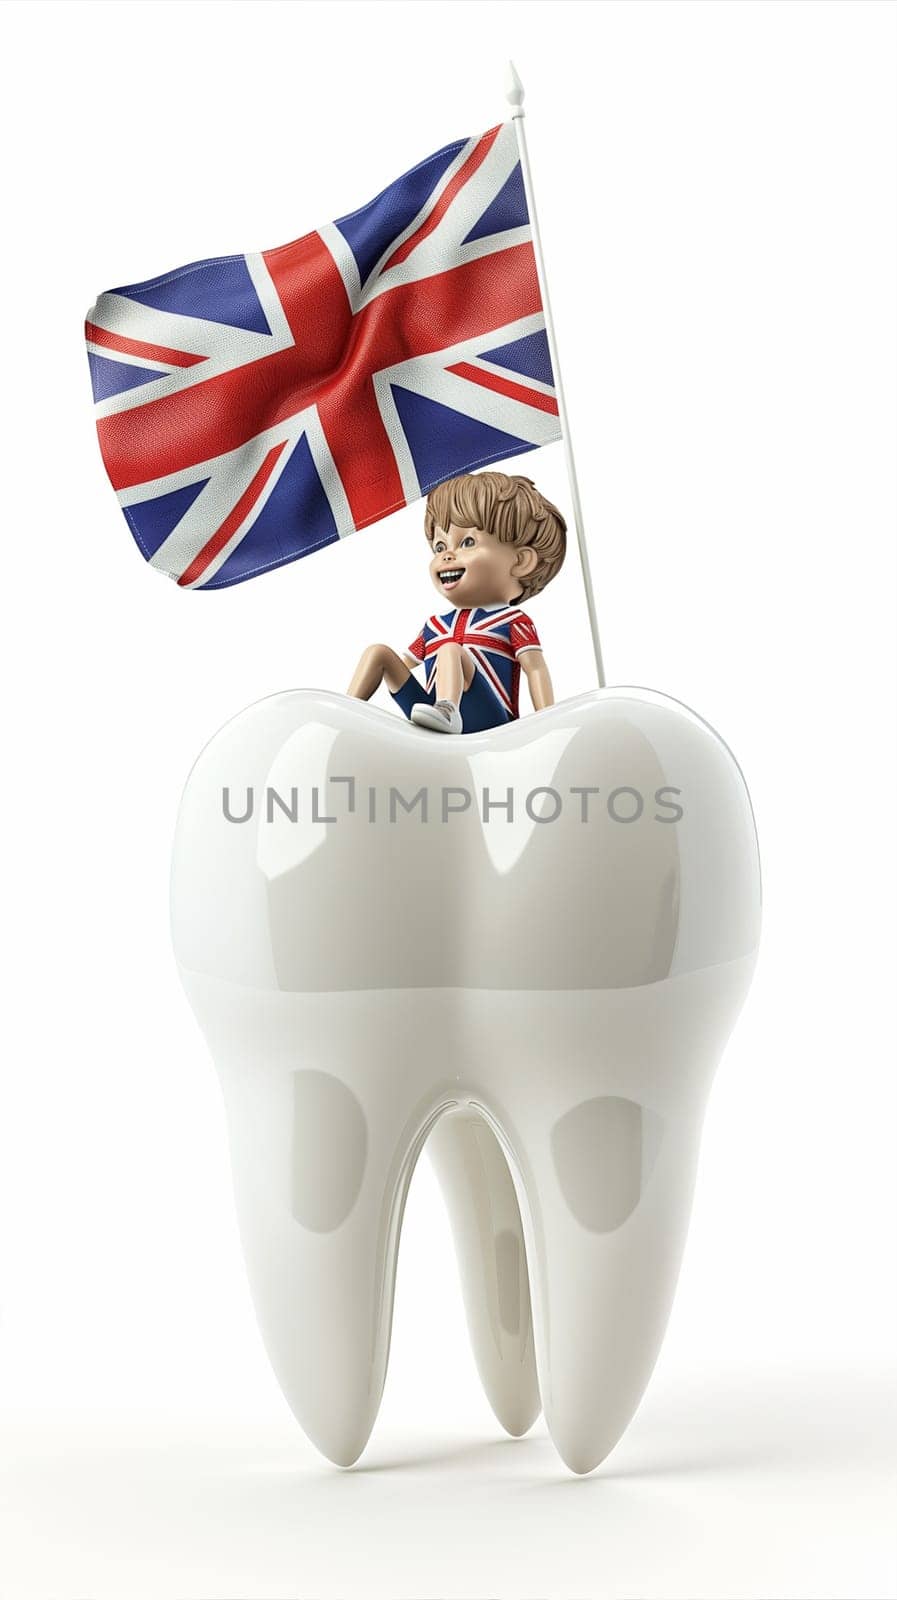 A tooth adorned with the British flag, symbolizing dental treatment related to the country or patriotism.